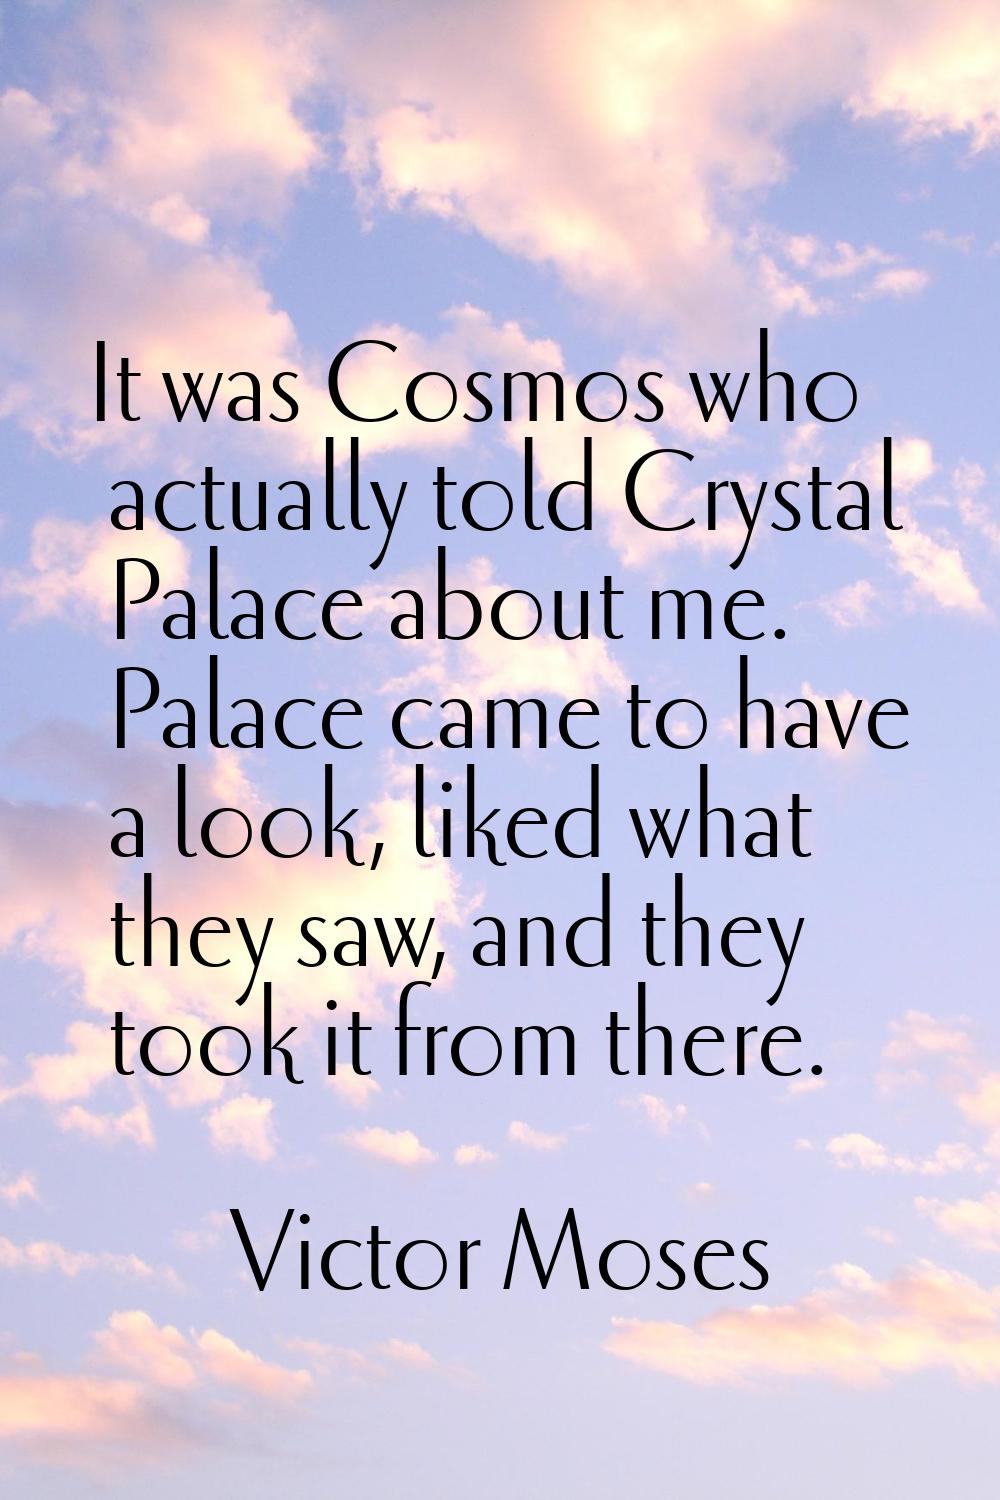 It was Cosmos who actually told Crystal Palace about me. Palace came to have a look, liked what the